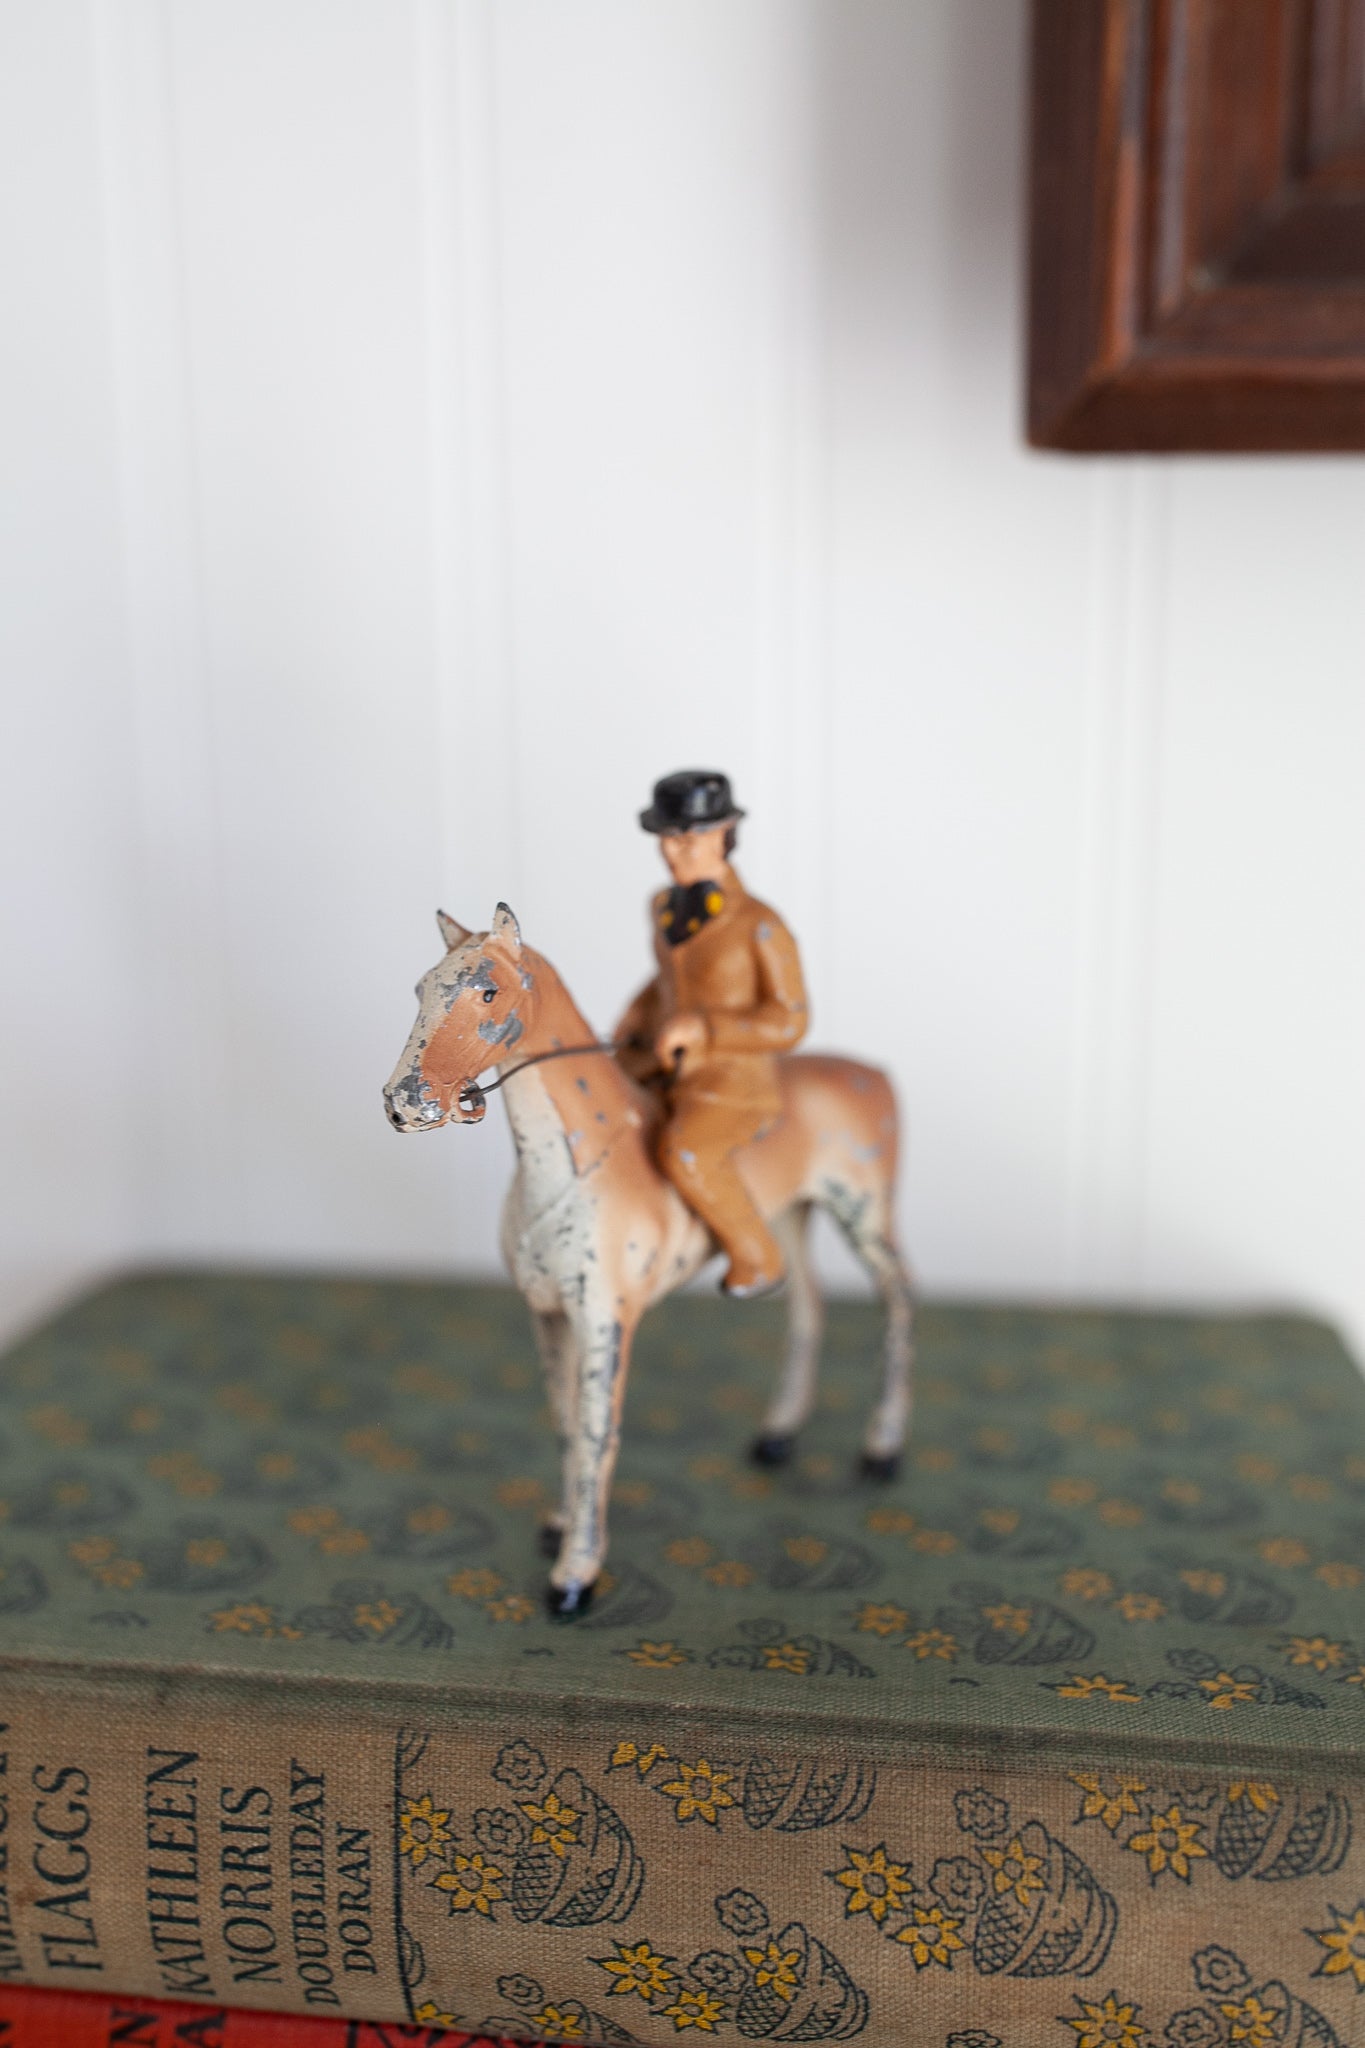 Vintage  Cast Iron Lead Painted Horse &Jockey Childs Play Toy Figure - 3.5" tall